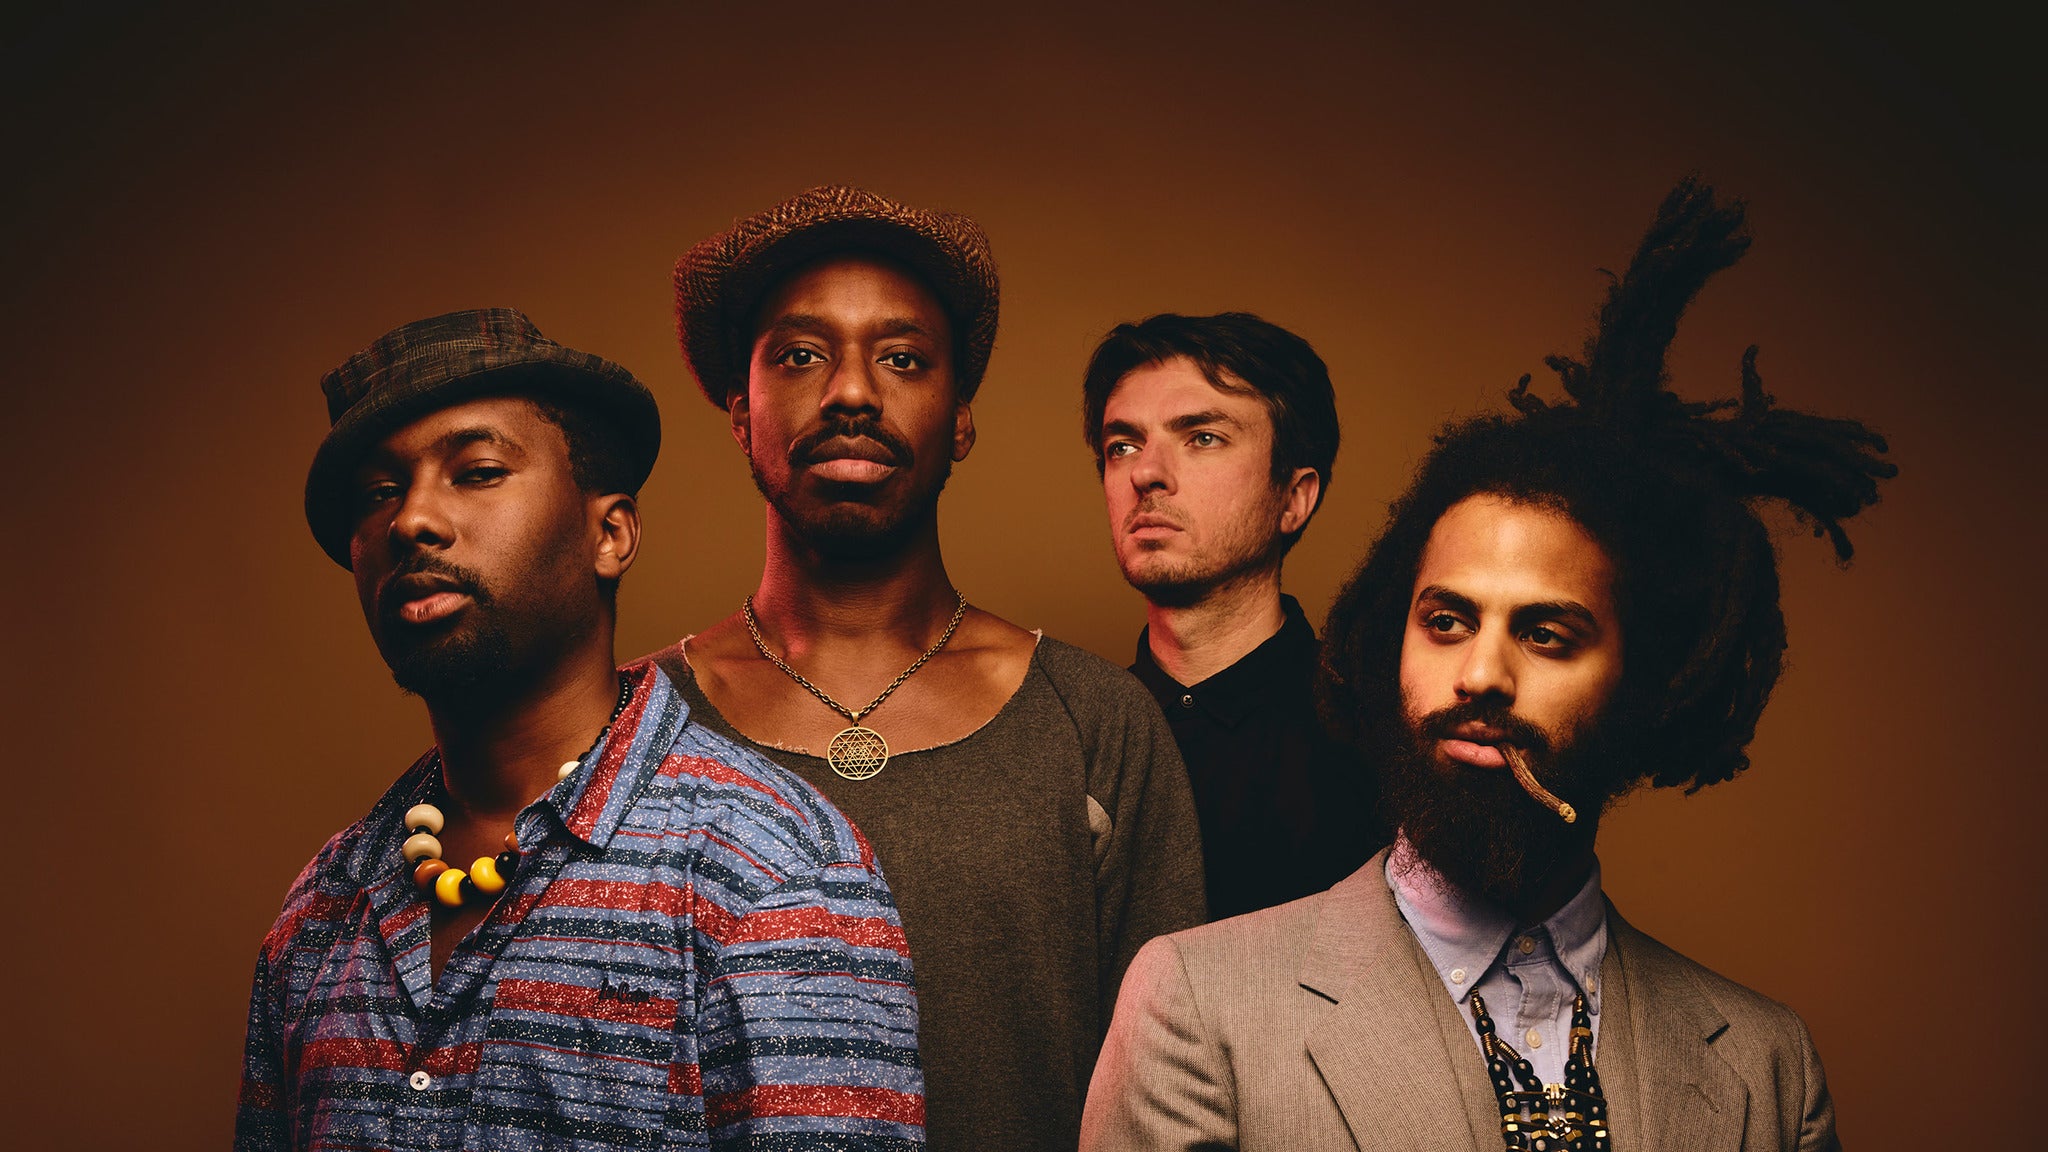 Image used with permission from Ticketmaster | Sons of Kemet tickets